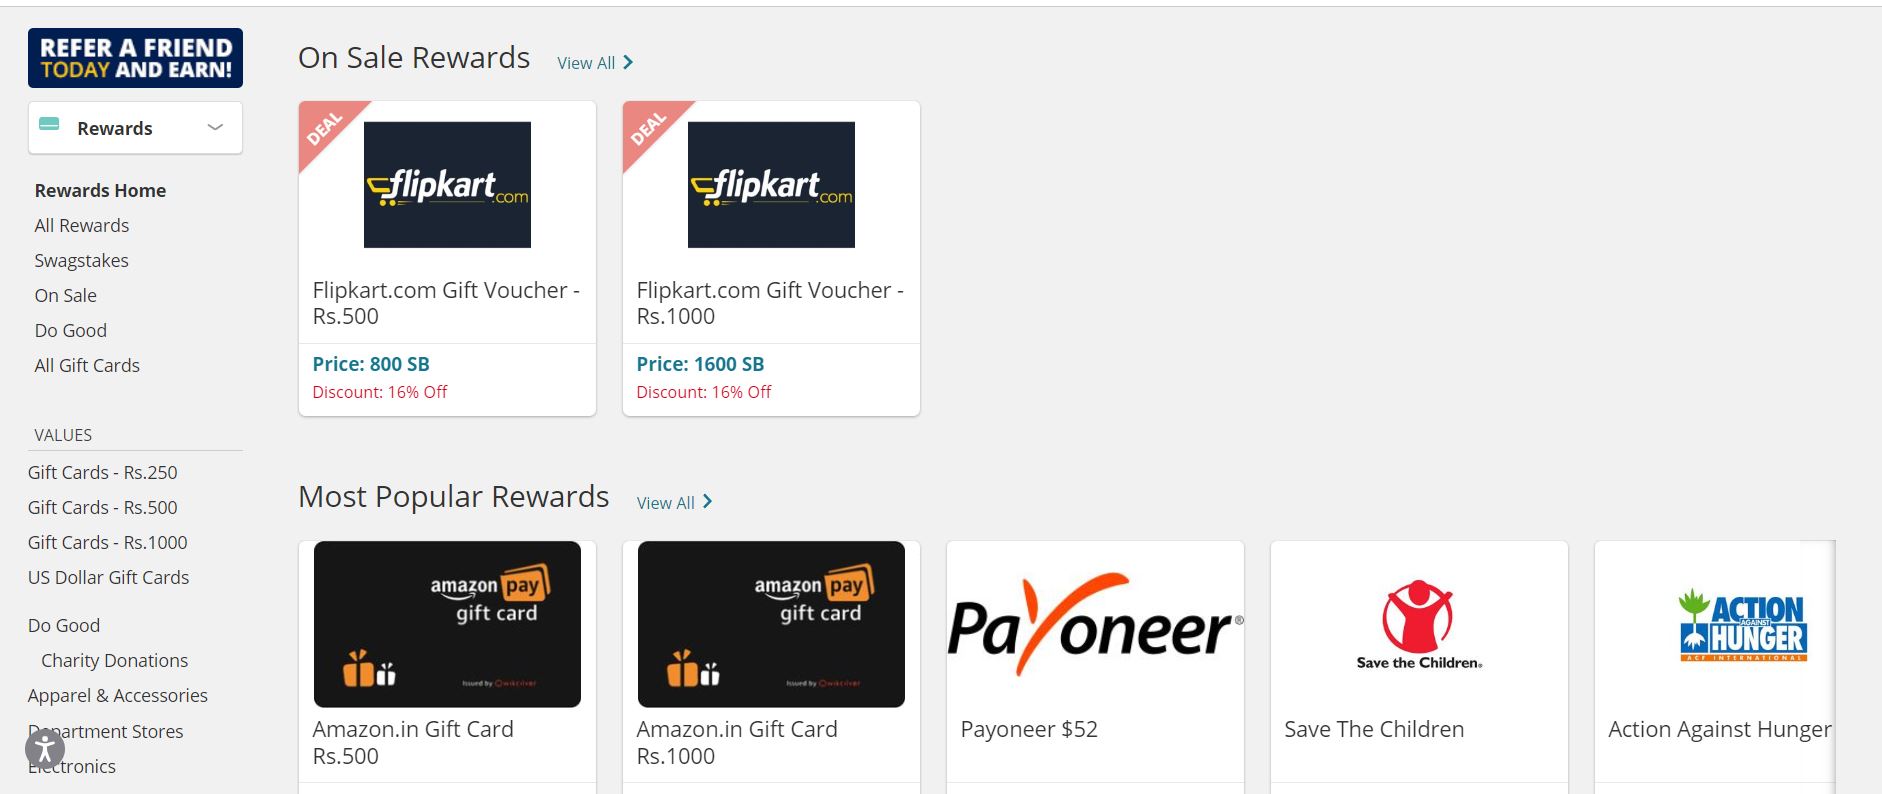 Earn Free Gift Cards and Cash with Online Paid Surveys | Swagbucks